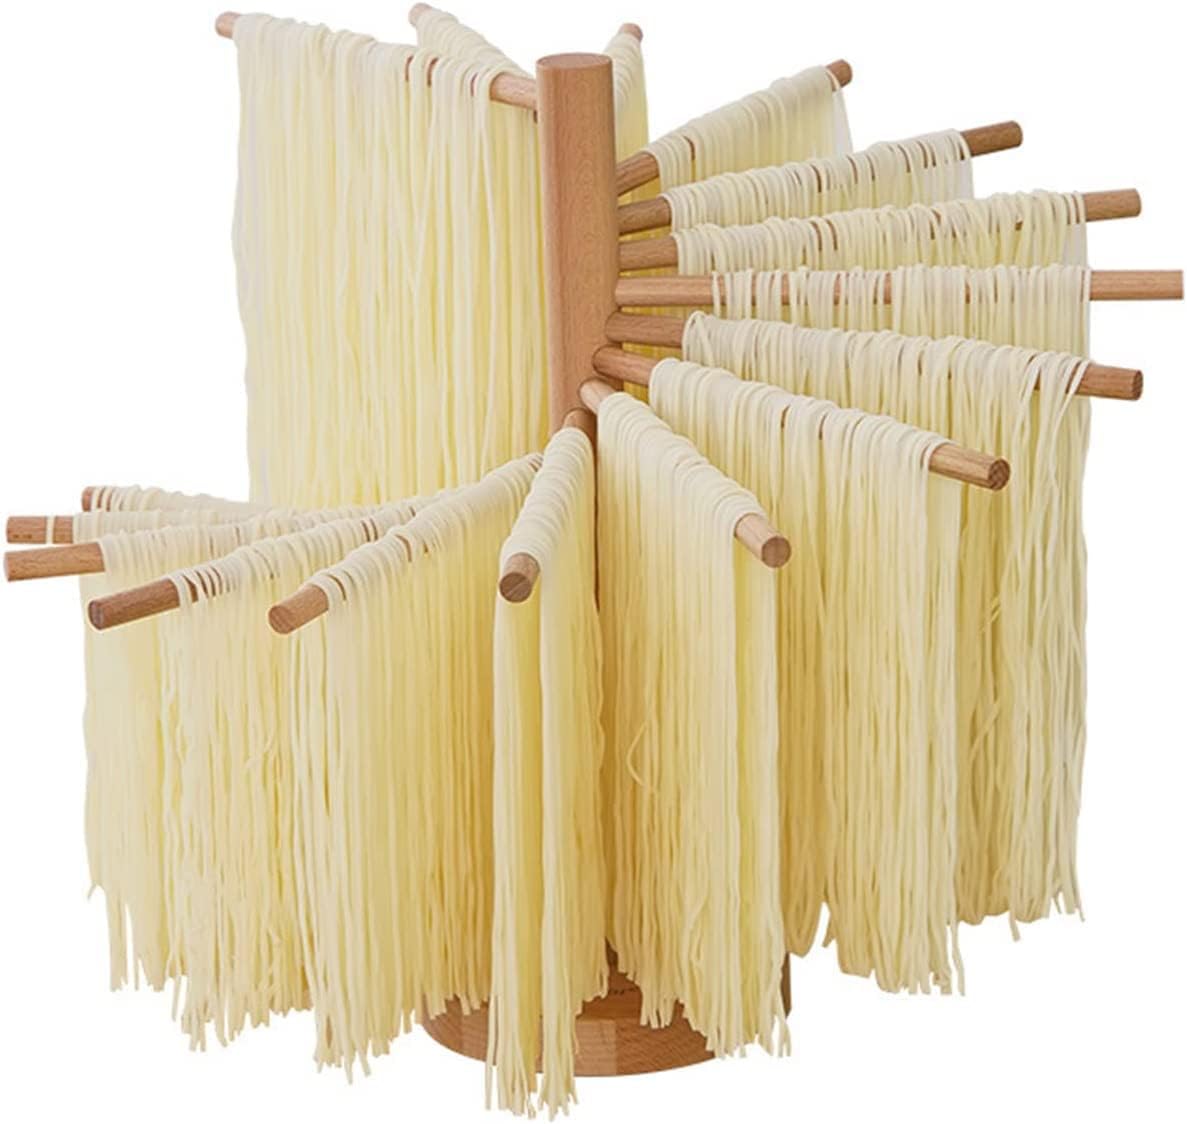 Wood Collapsible Homemade Household Noodle Dryer Rack Hanging Pasta Drying Rack for Home Kitchen